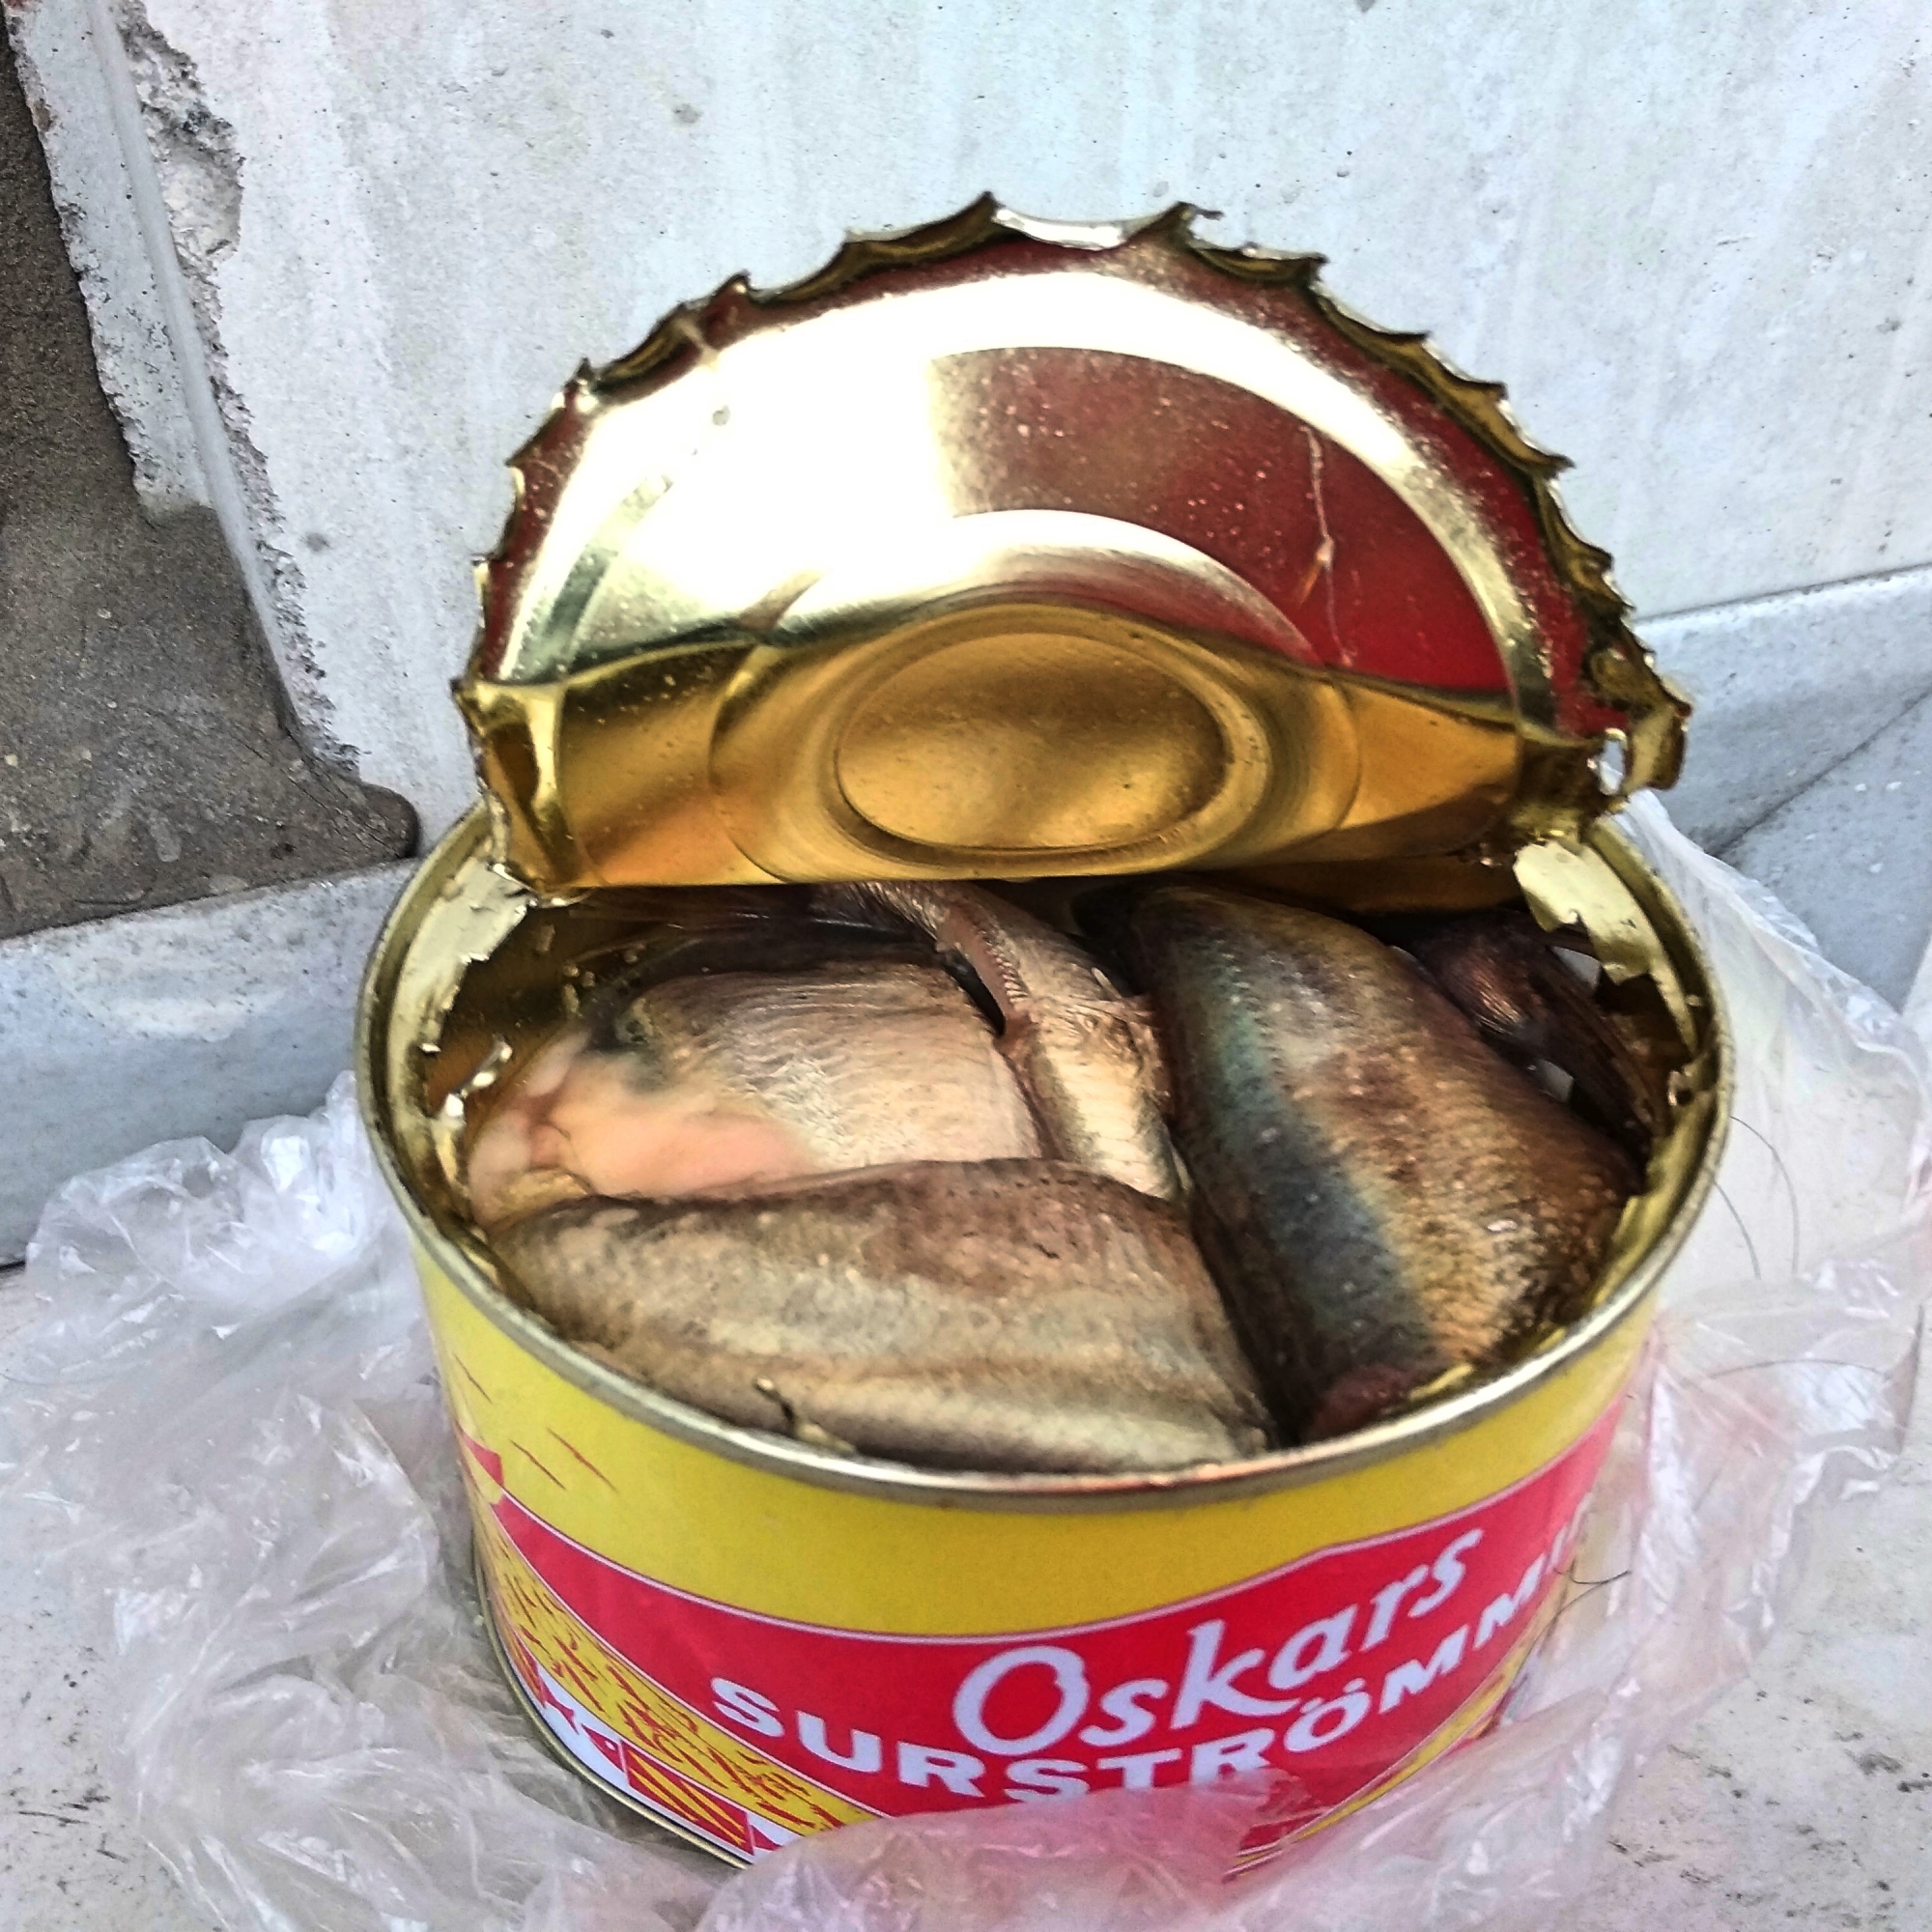 Sour Herring (surströmming) the right way  w/ friends vomiting in the  background 